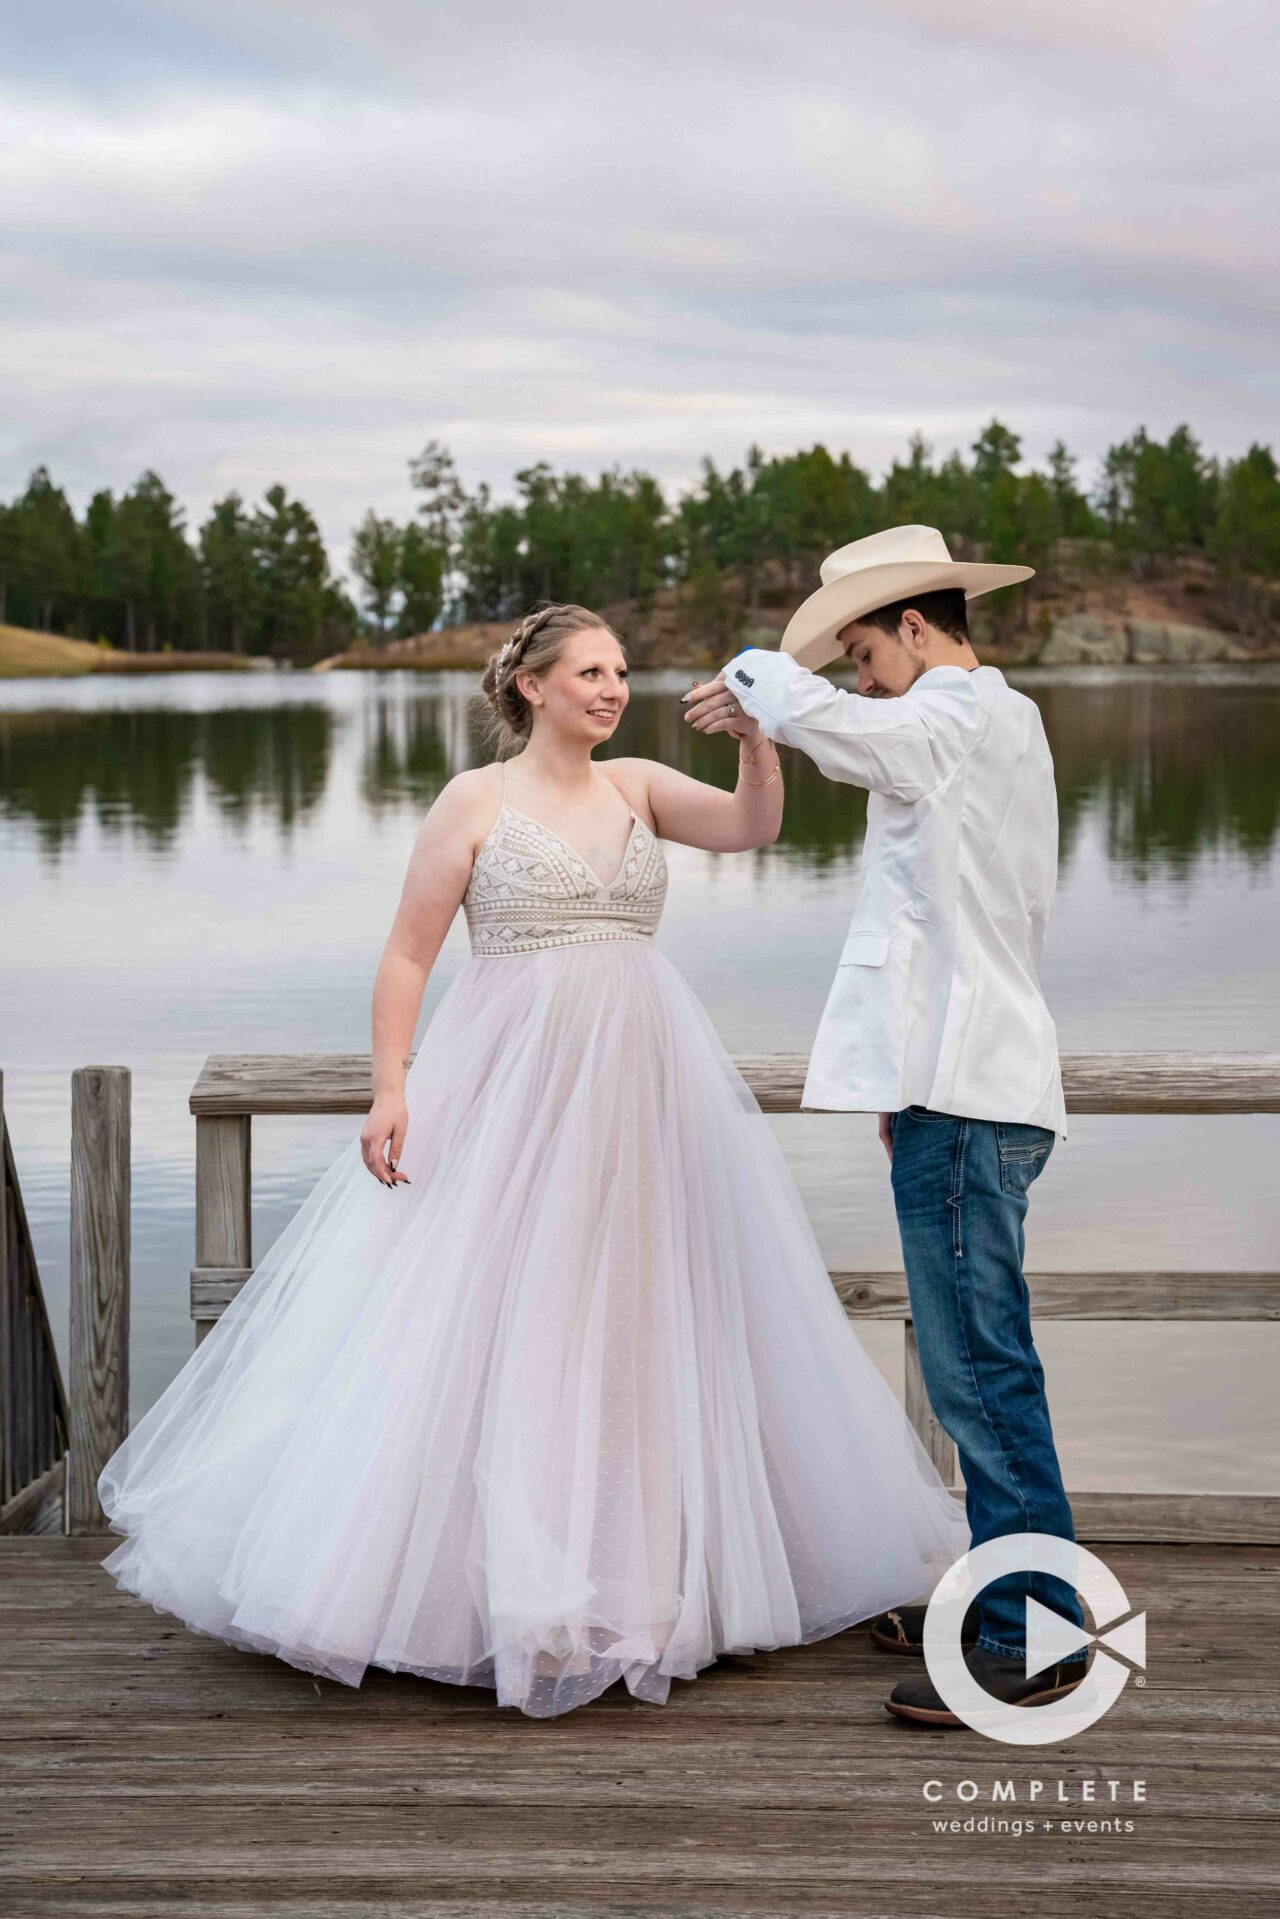 Iconic Wedding Photo Spots in the Black Hills